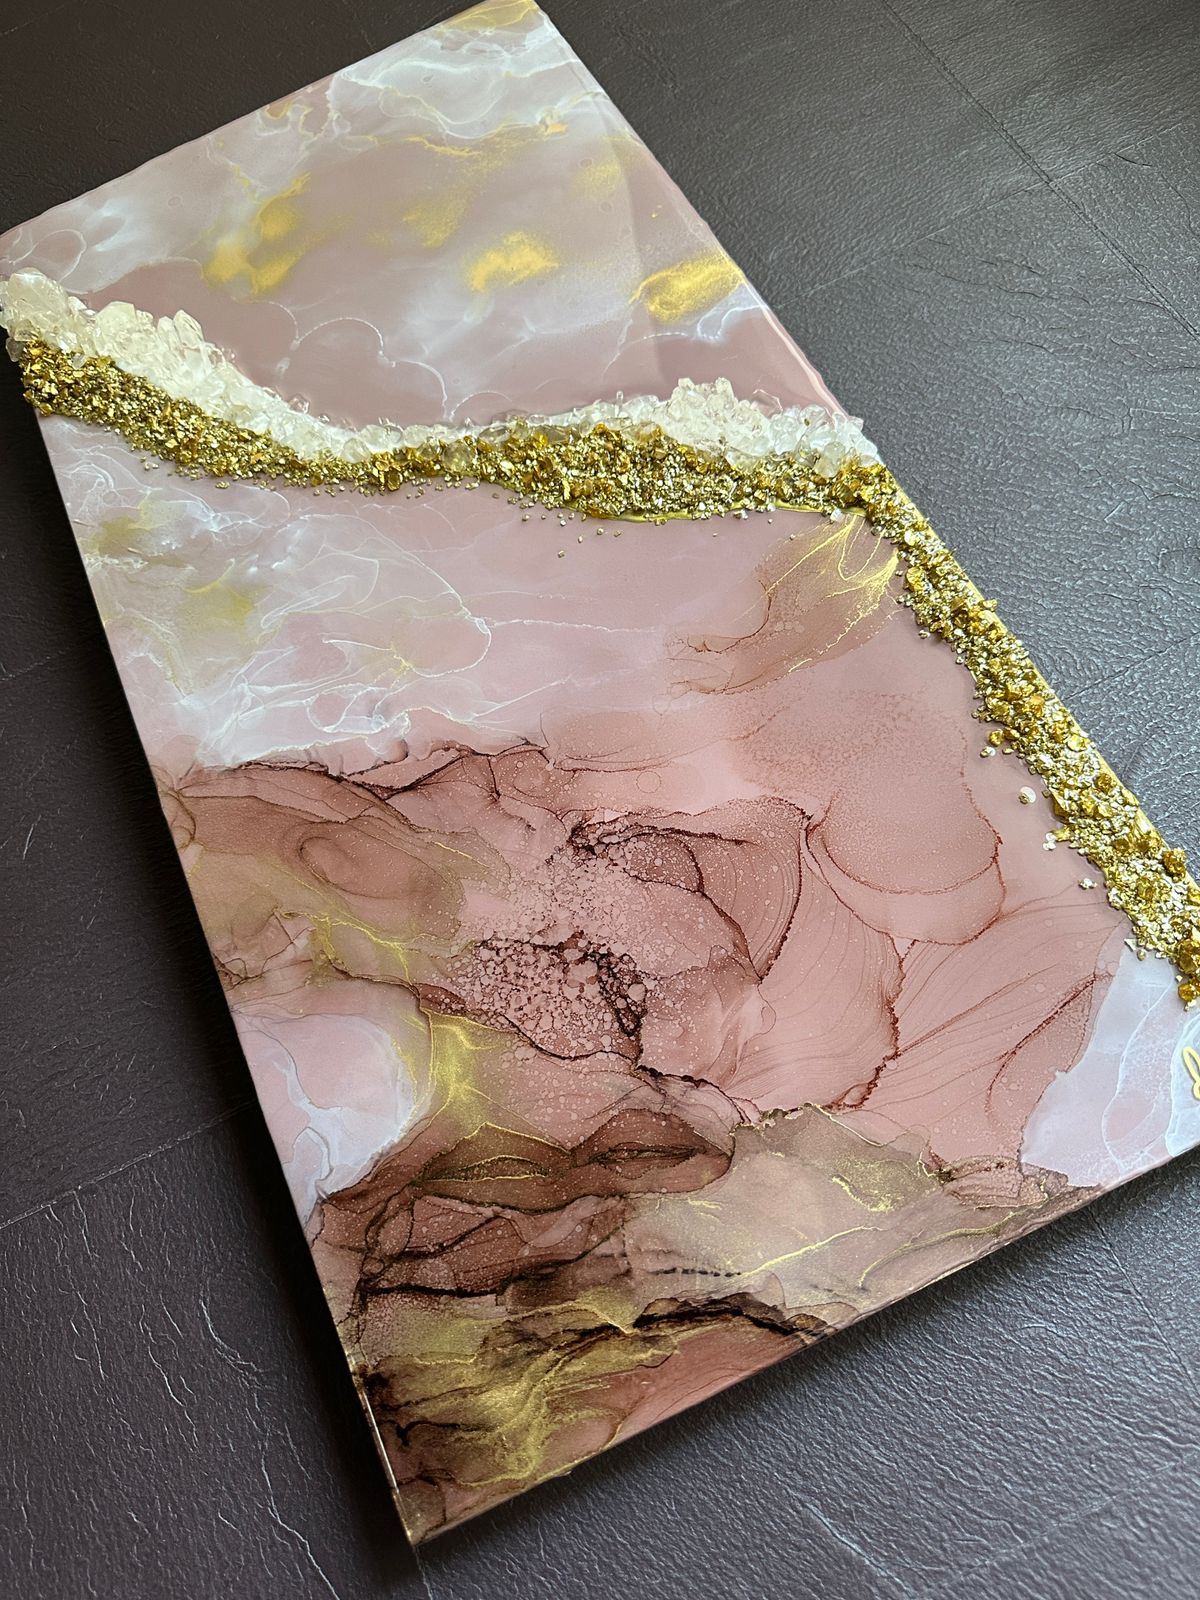 Crystal Sand' Alcohol Ink and Resin Art on Wood Panel